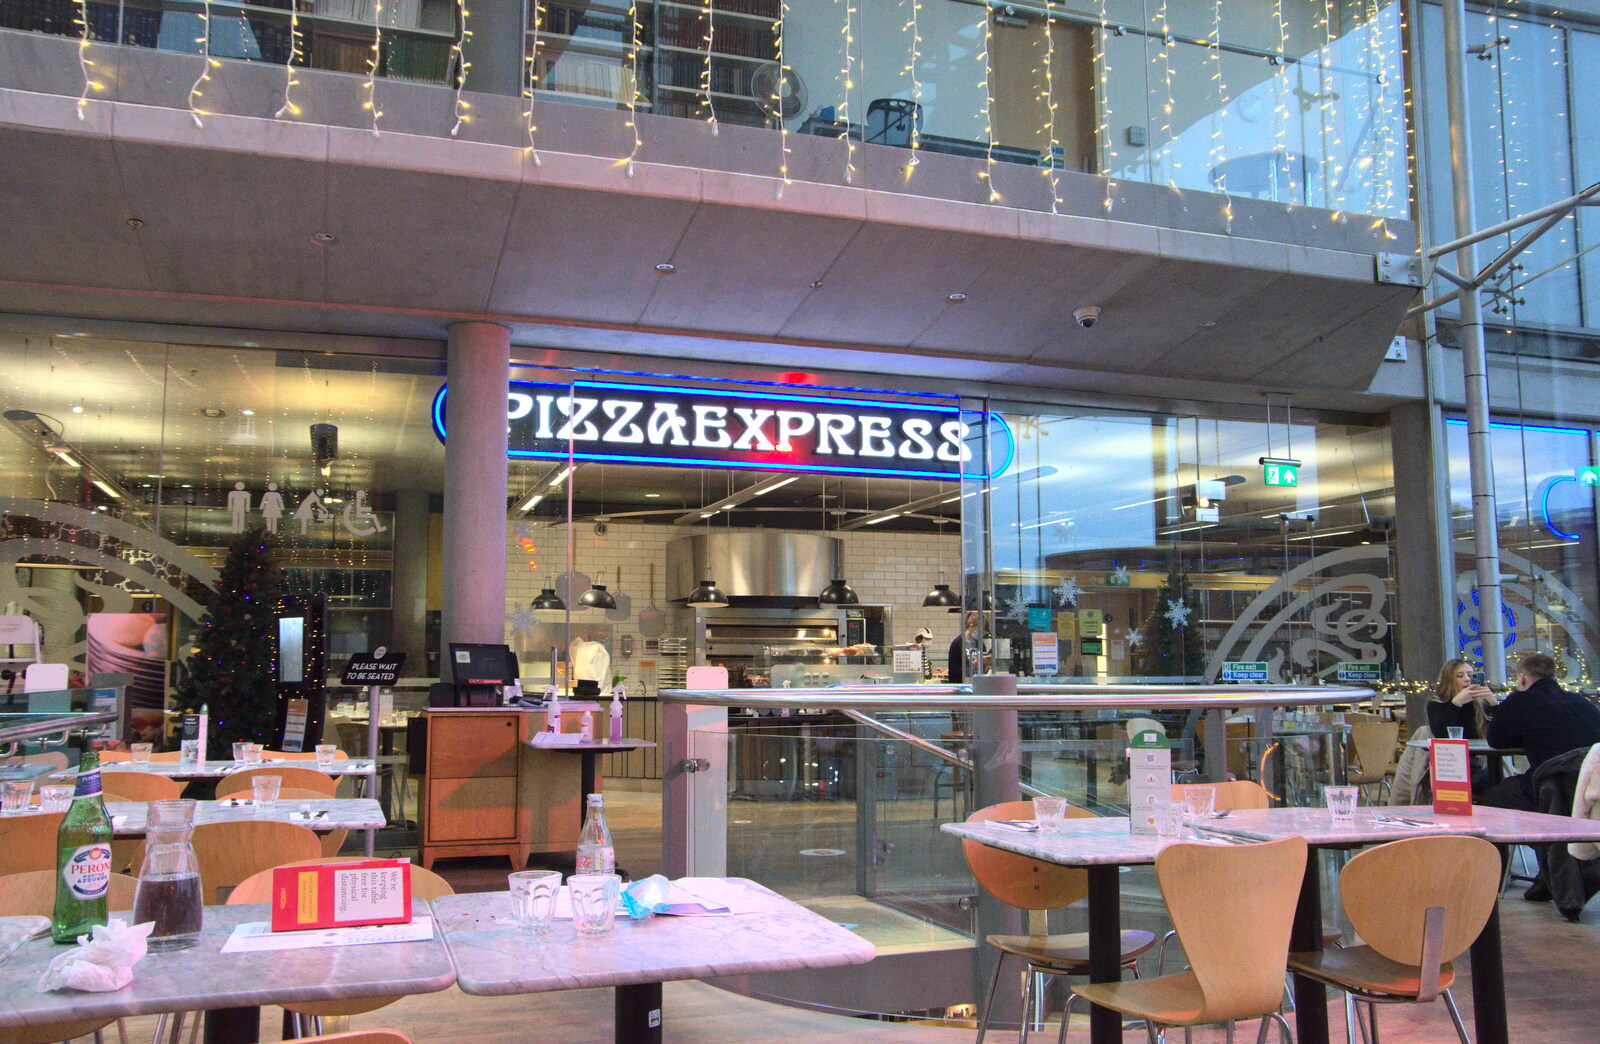 Pizza Express in the Forum from A Bit of Christmas Shopping, Norwich, Norfolk - 23rd December 2020